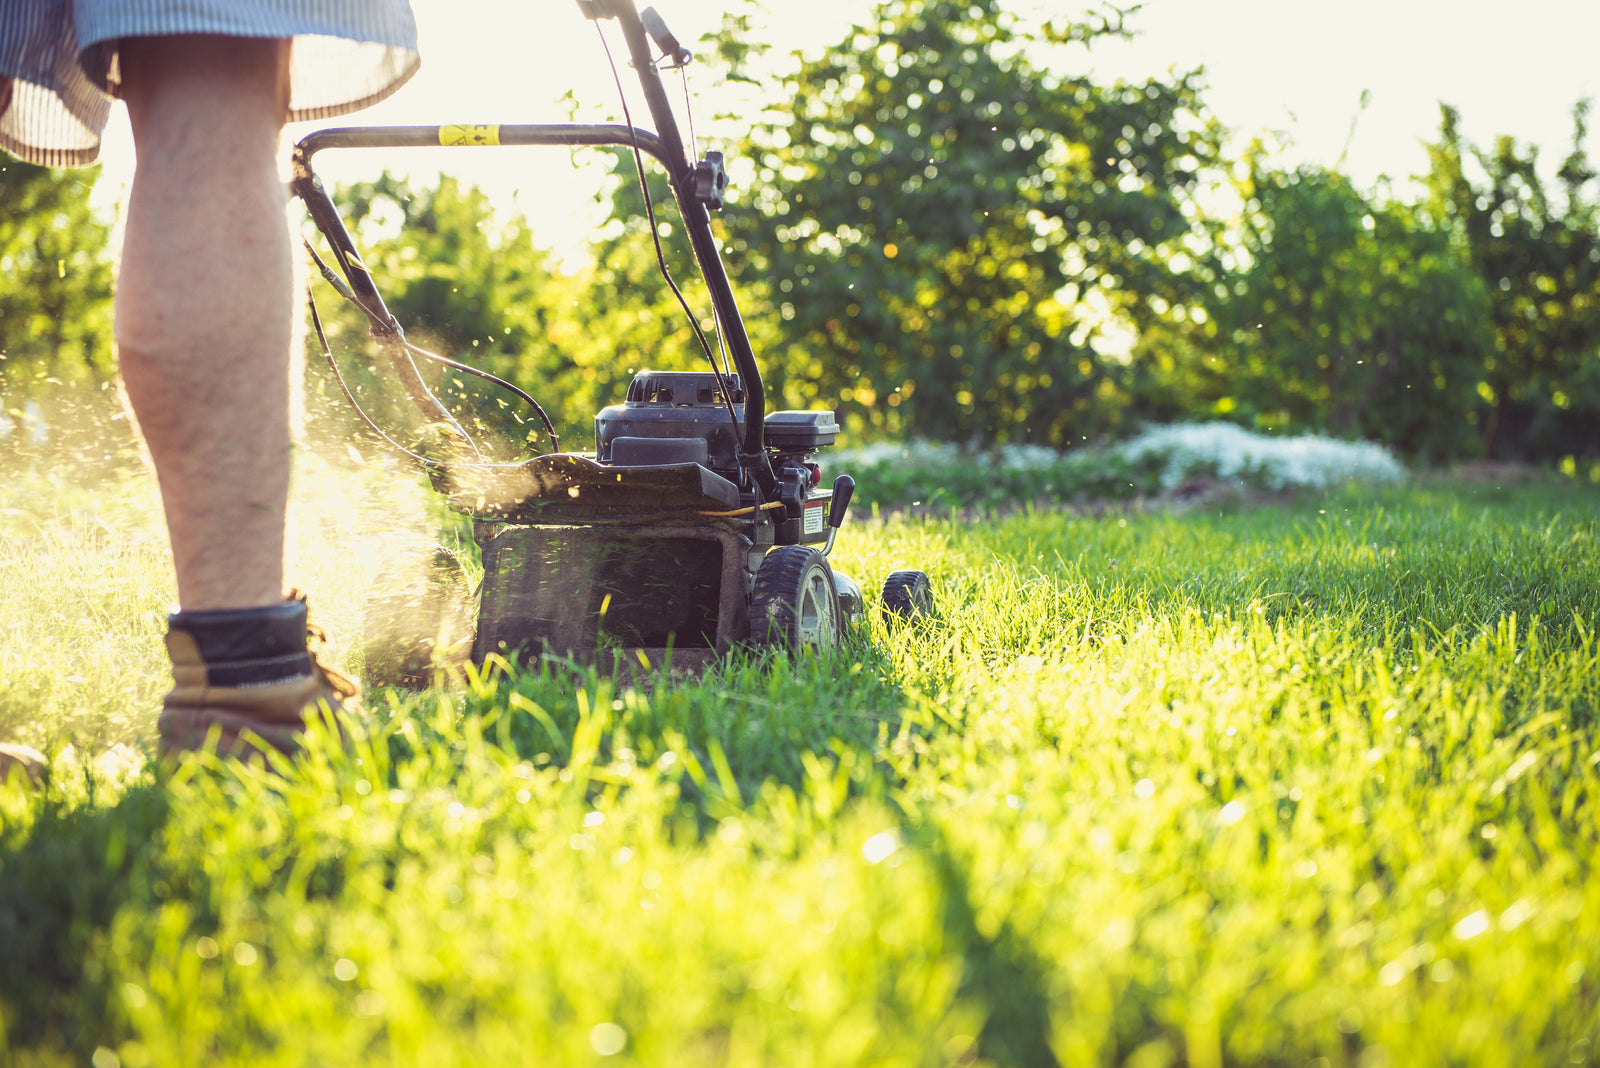 Father's Day Gifts Practical Ideas for Yard Work and Irrigation